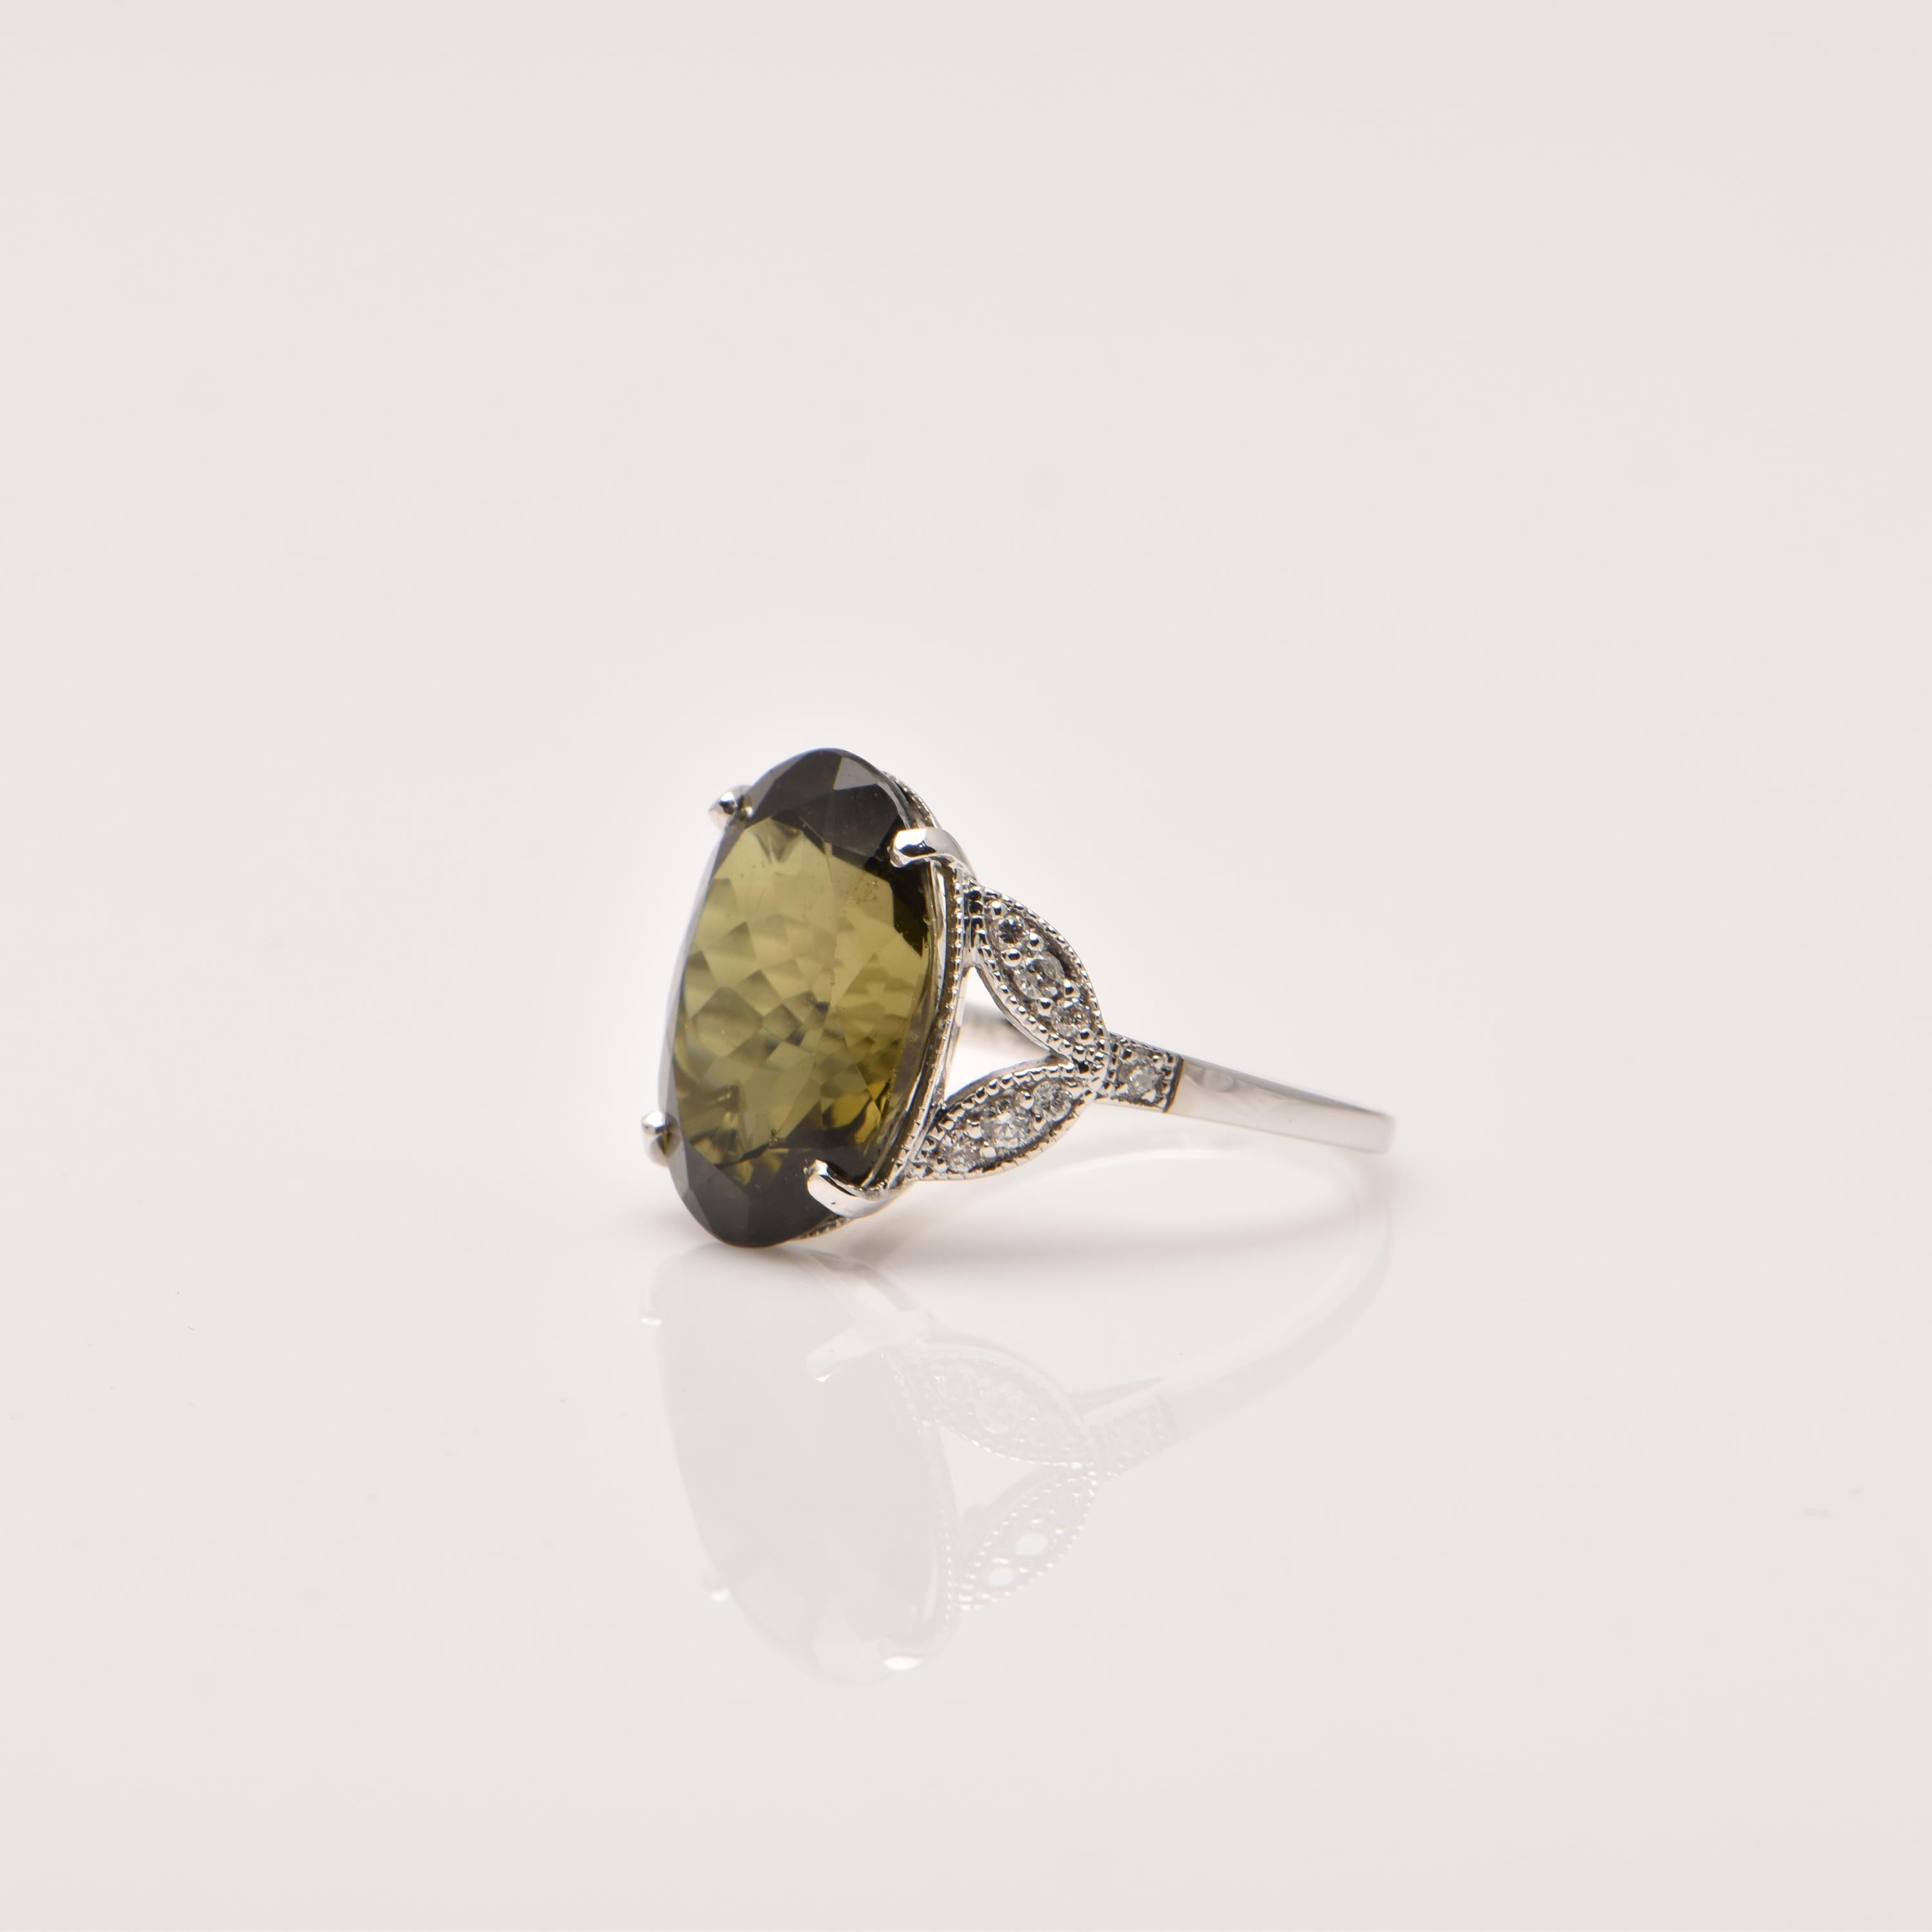 An 18ct White Gold ring showcasing a Green Tourmaline (9.13ct), and 14 Diamonds totalling 0.17ct.